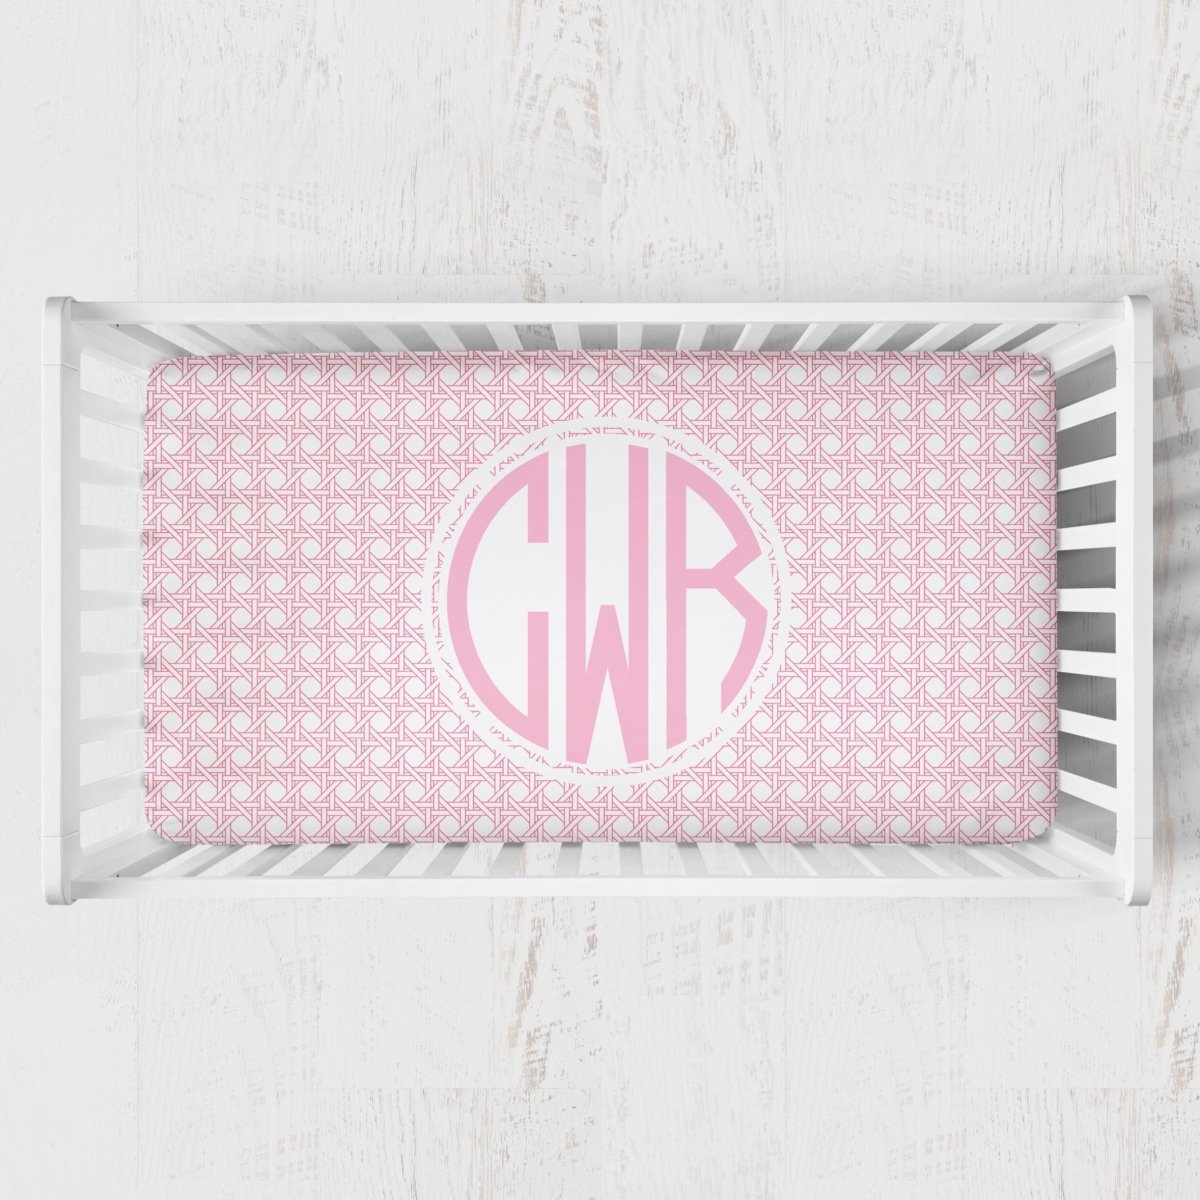 Preppy Summer Monogrammed Crib Sheet - gender_girl, Personalized_Yes, text